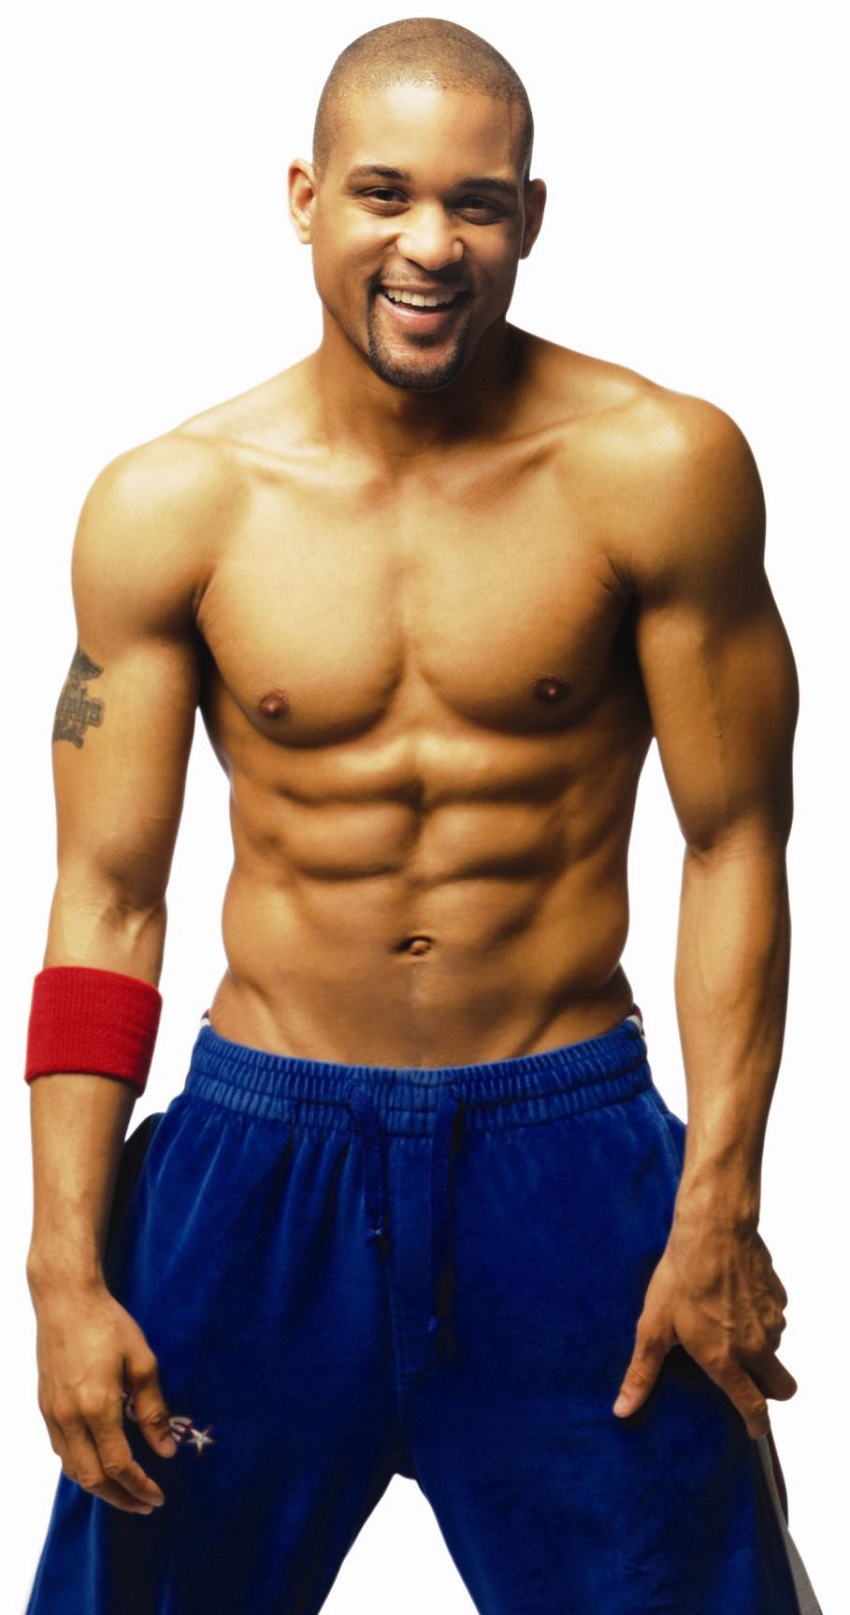 Shaun T posing shirtless showing off his lean and fit physique